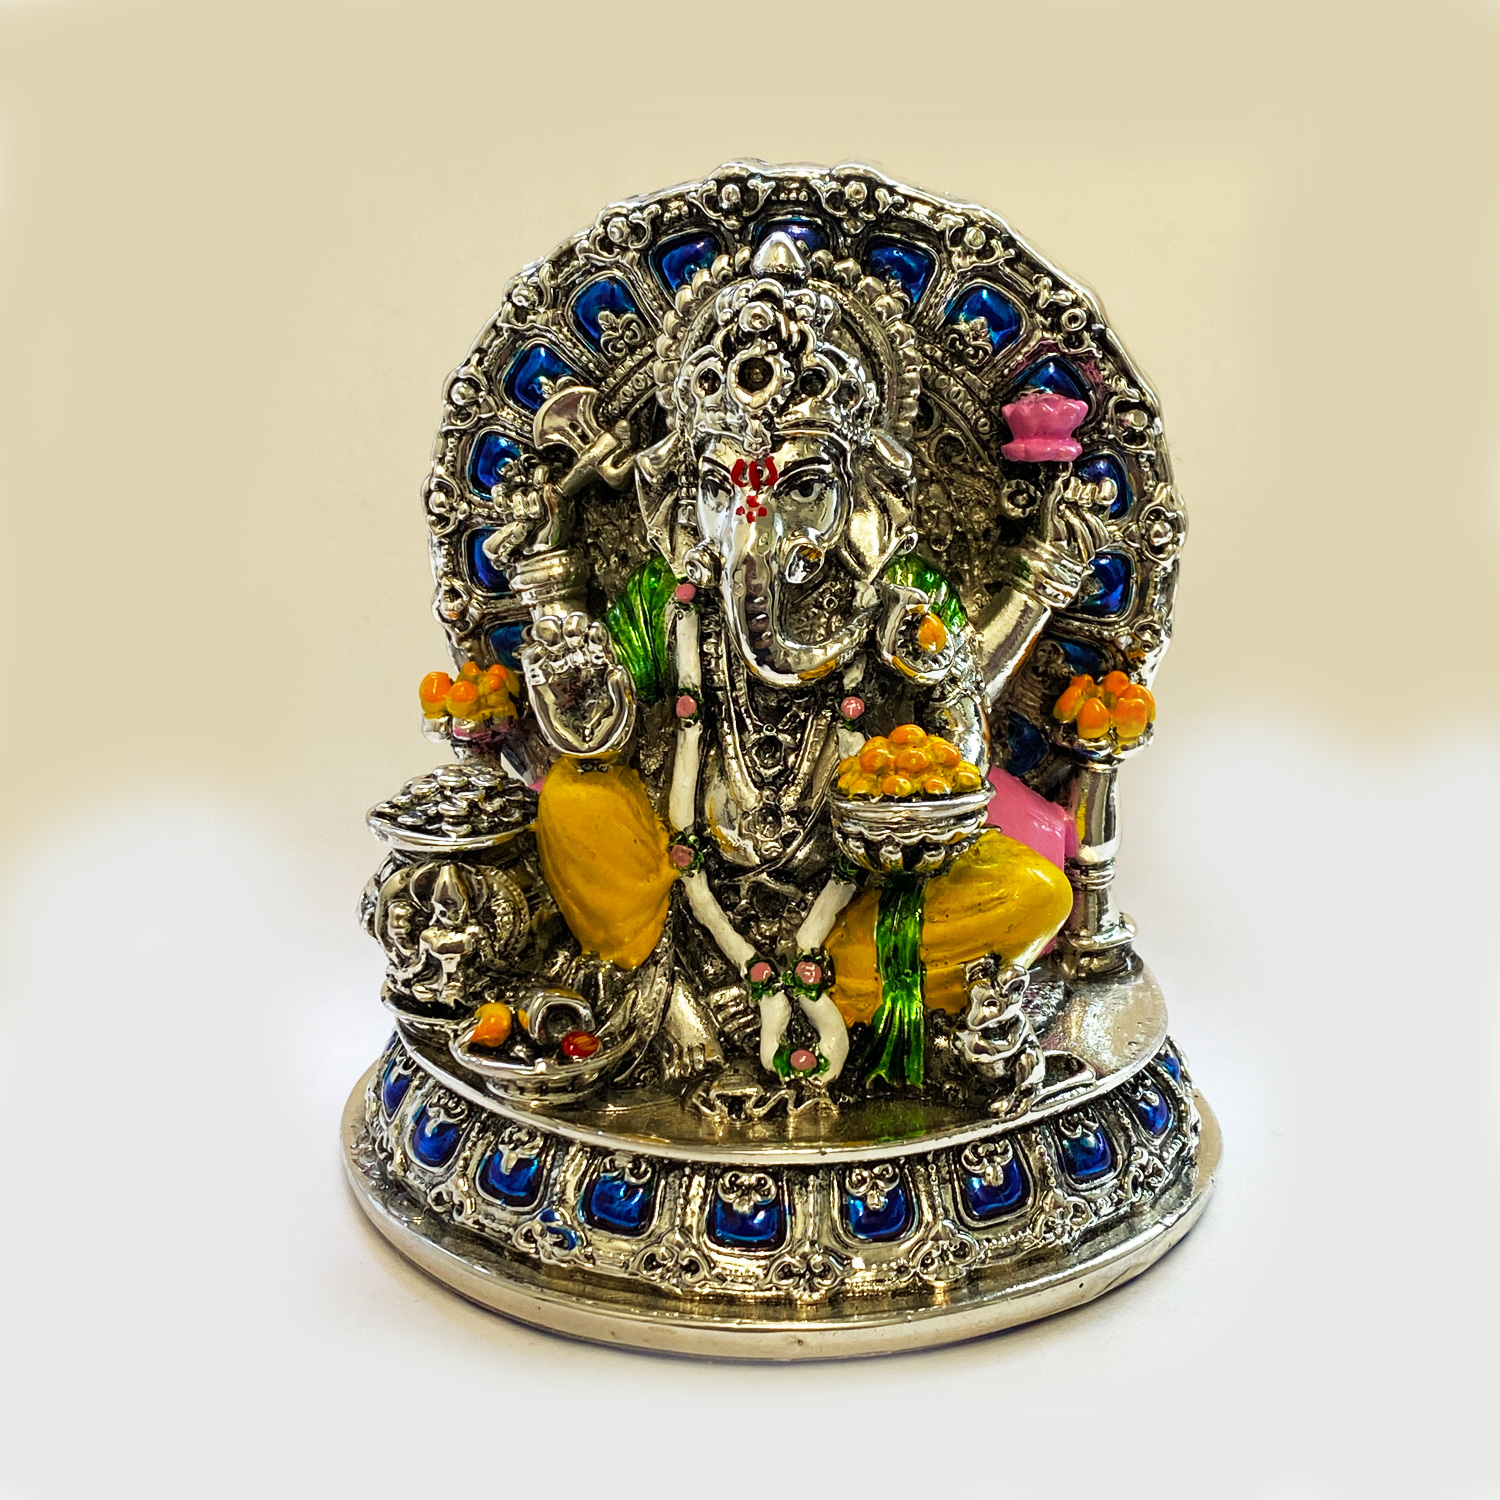 Best Silver Ganesha Idol with price – 5 inch Height